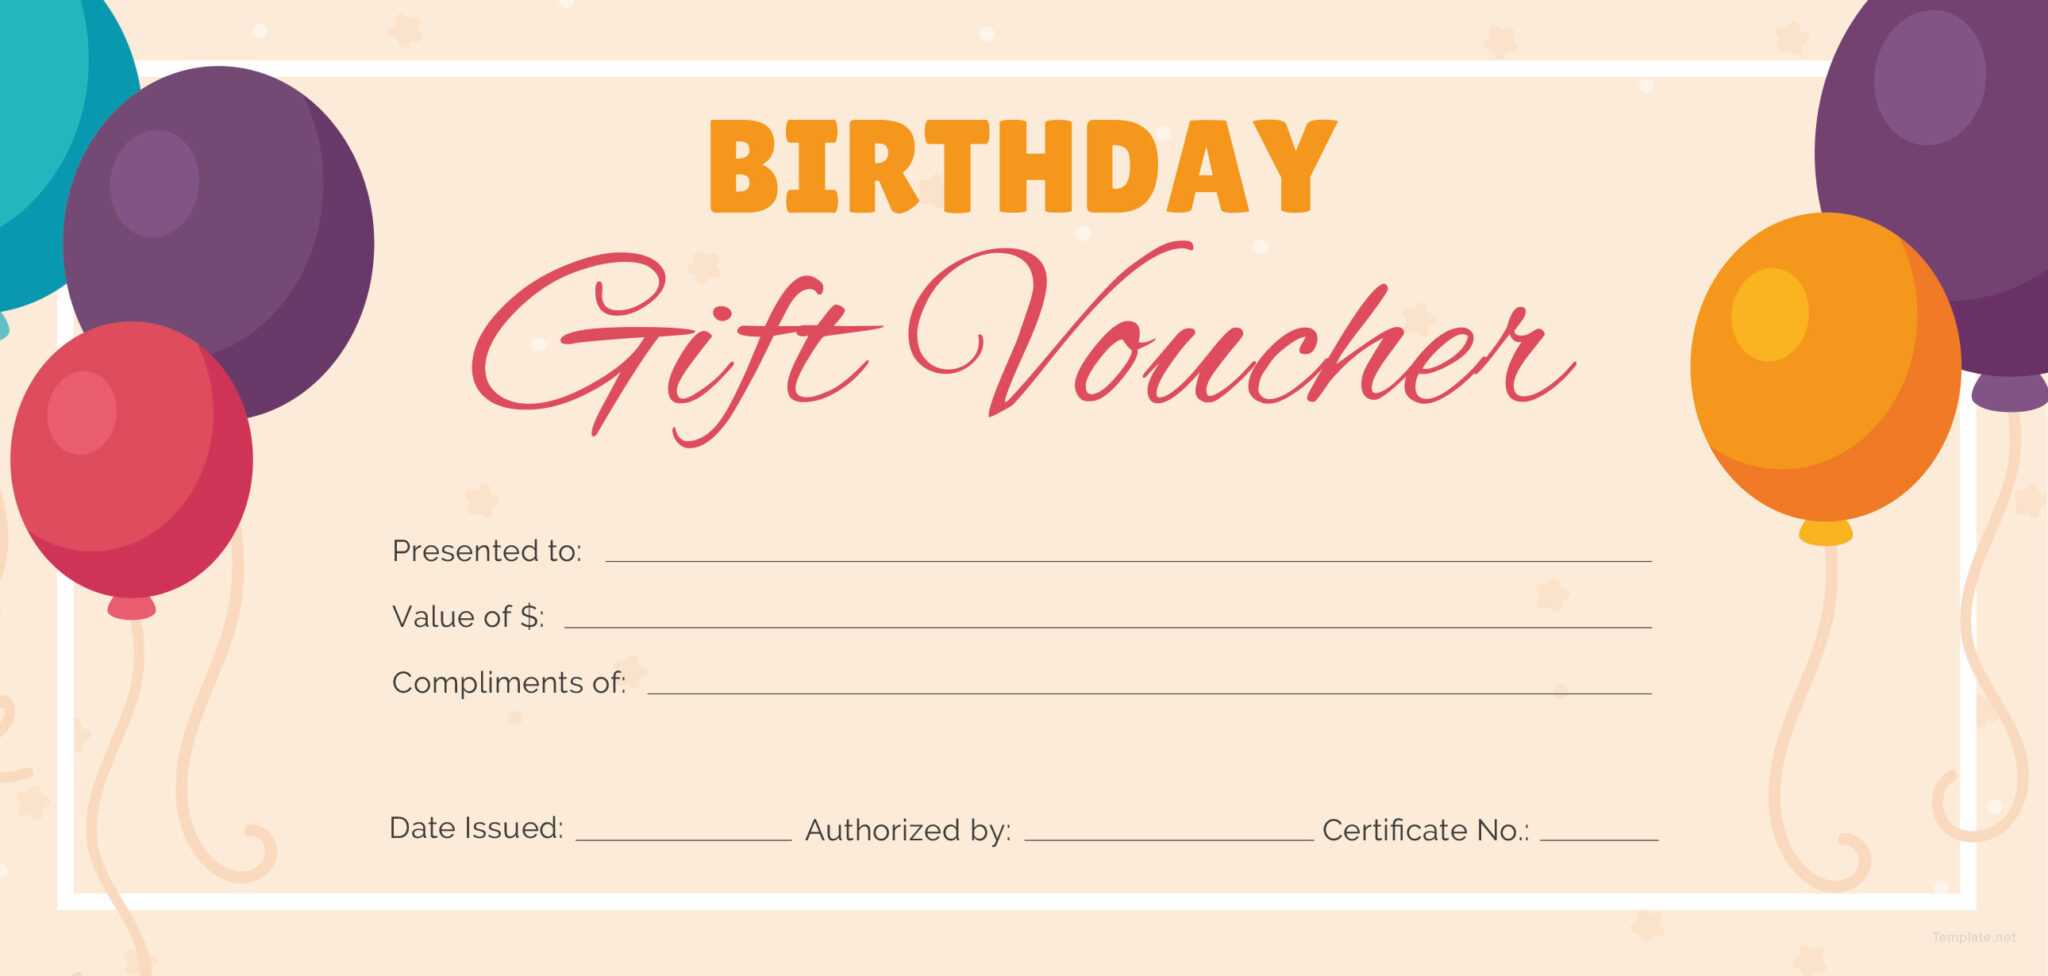 birthday gift certificate template free printable throughout printable